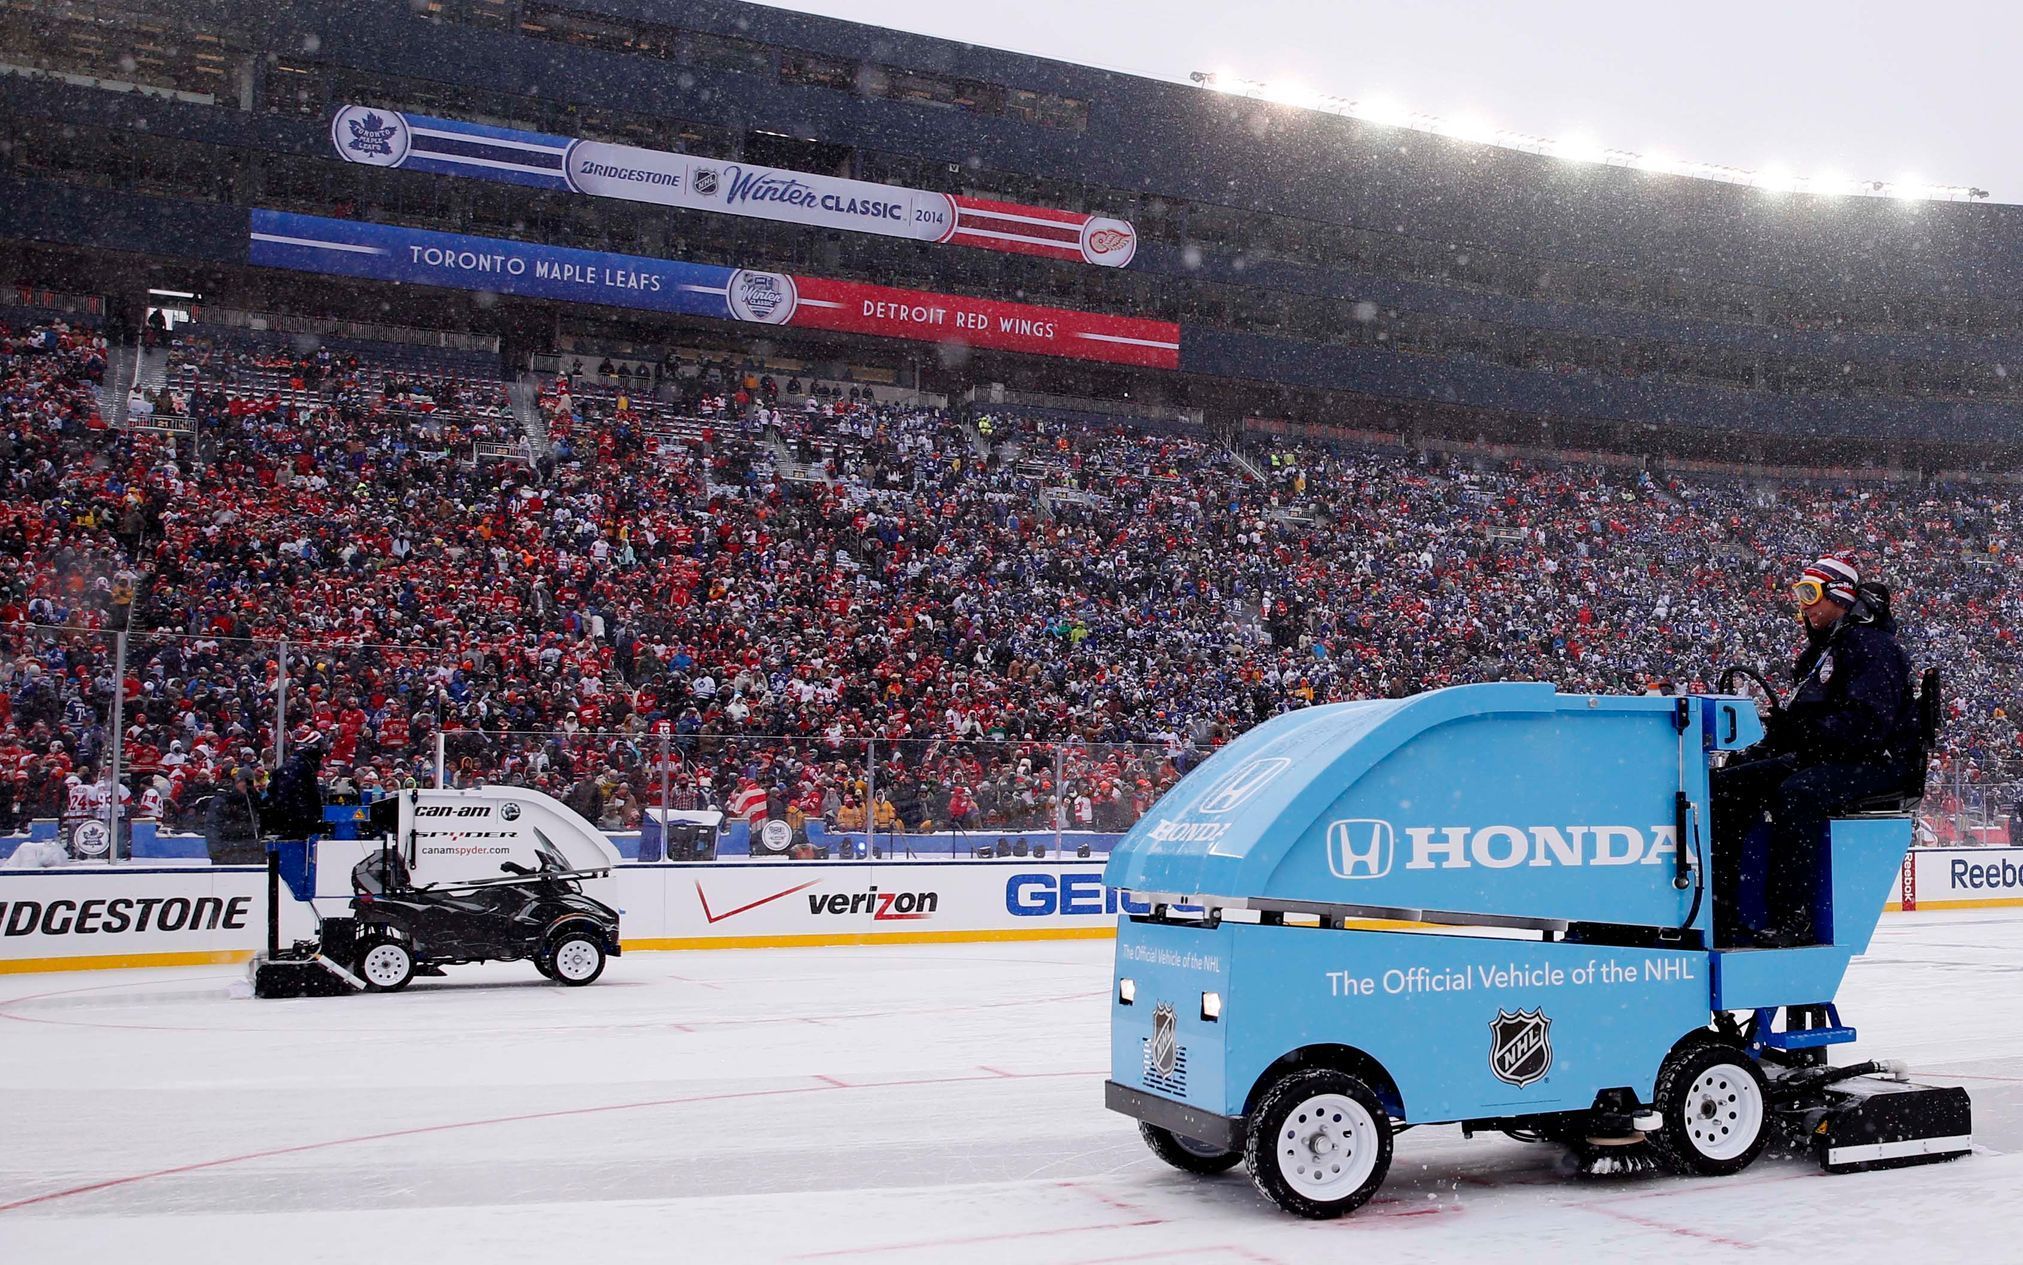 NHL Winter Classic, Detroit-Toronto: rolby